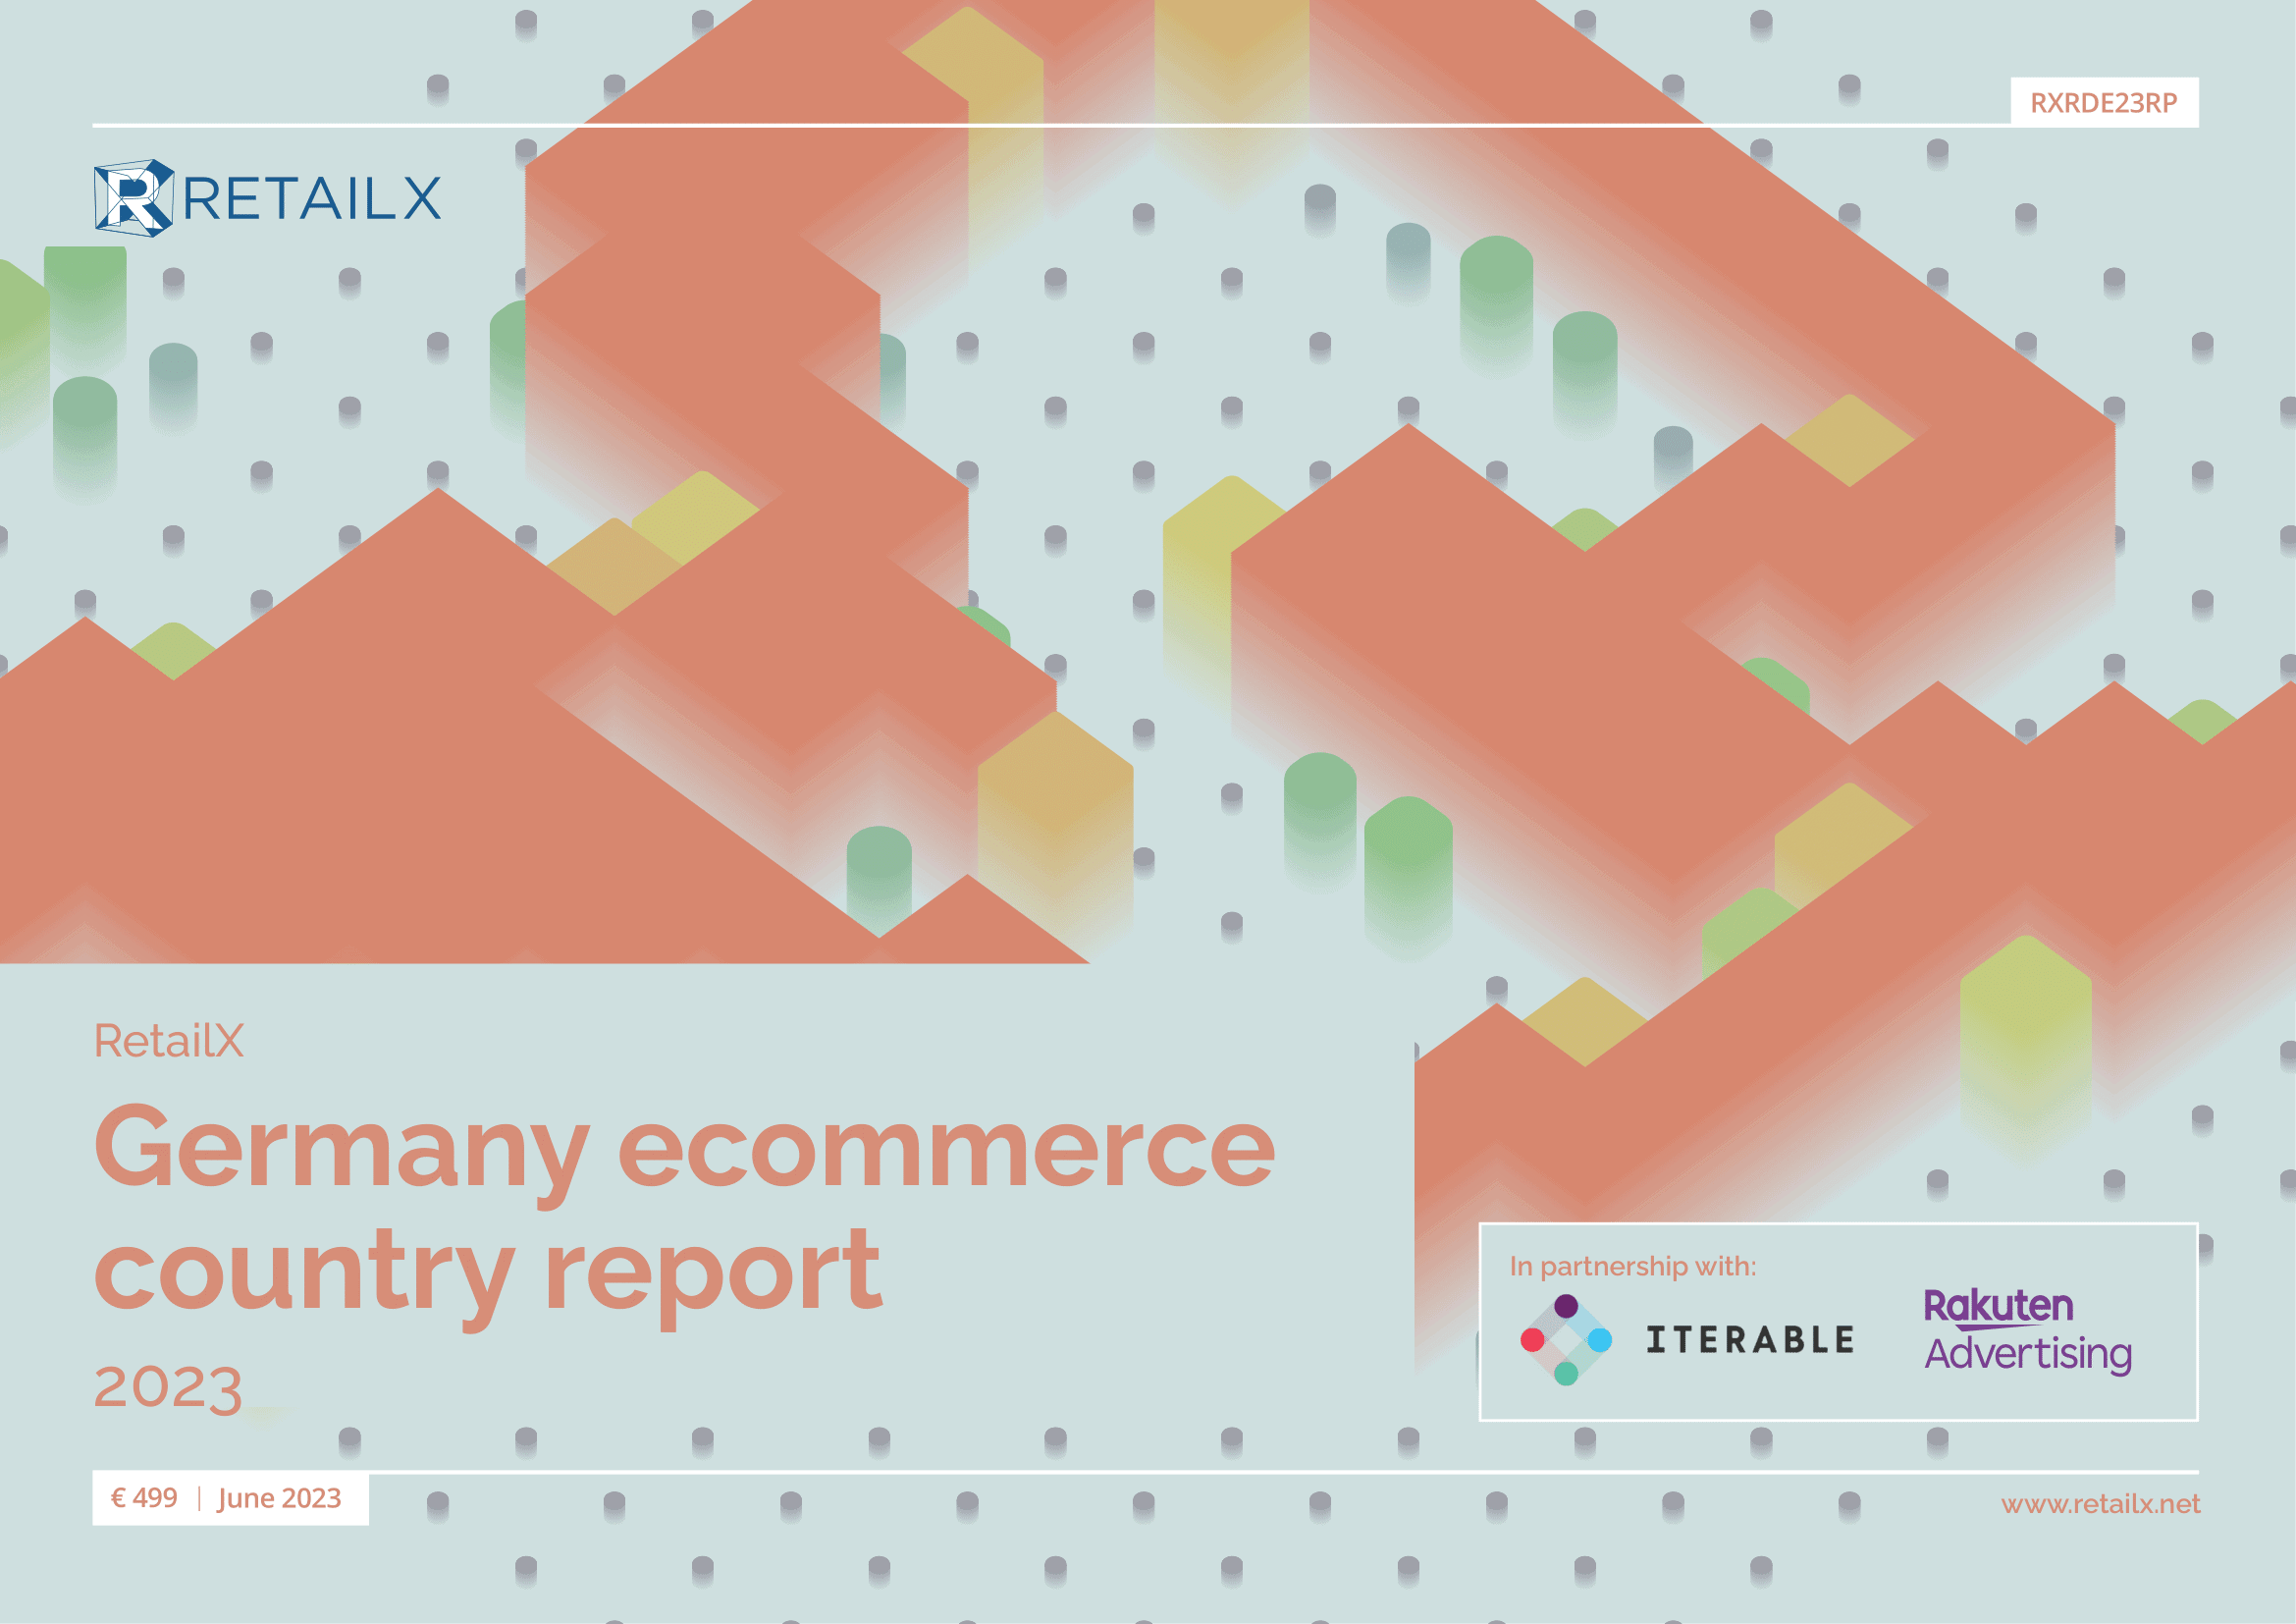 Germany Ecommerce country report 2023 cover